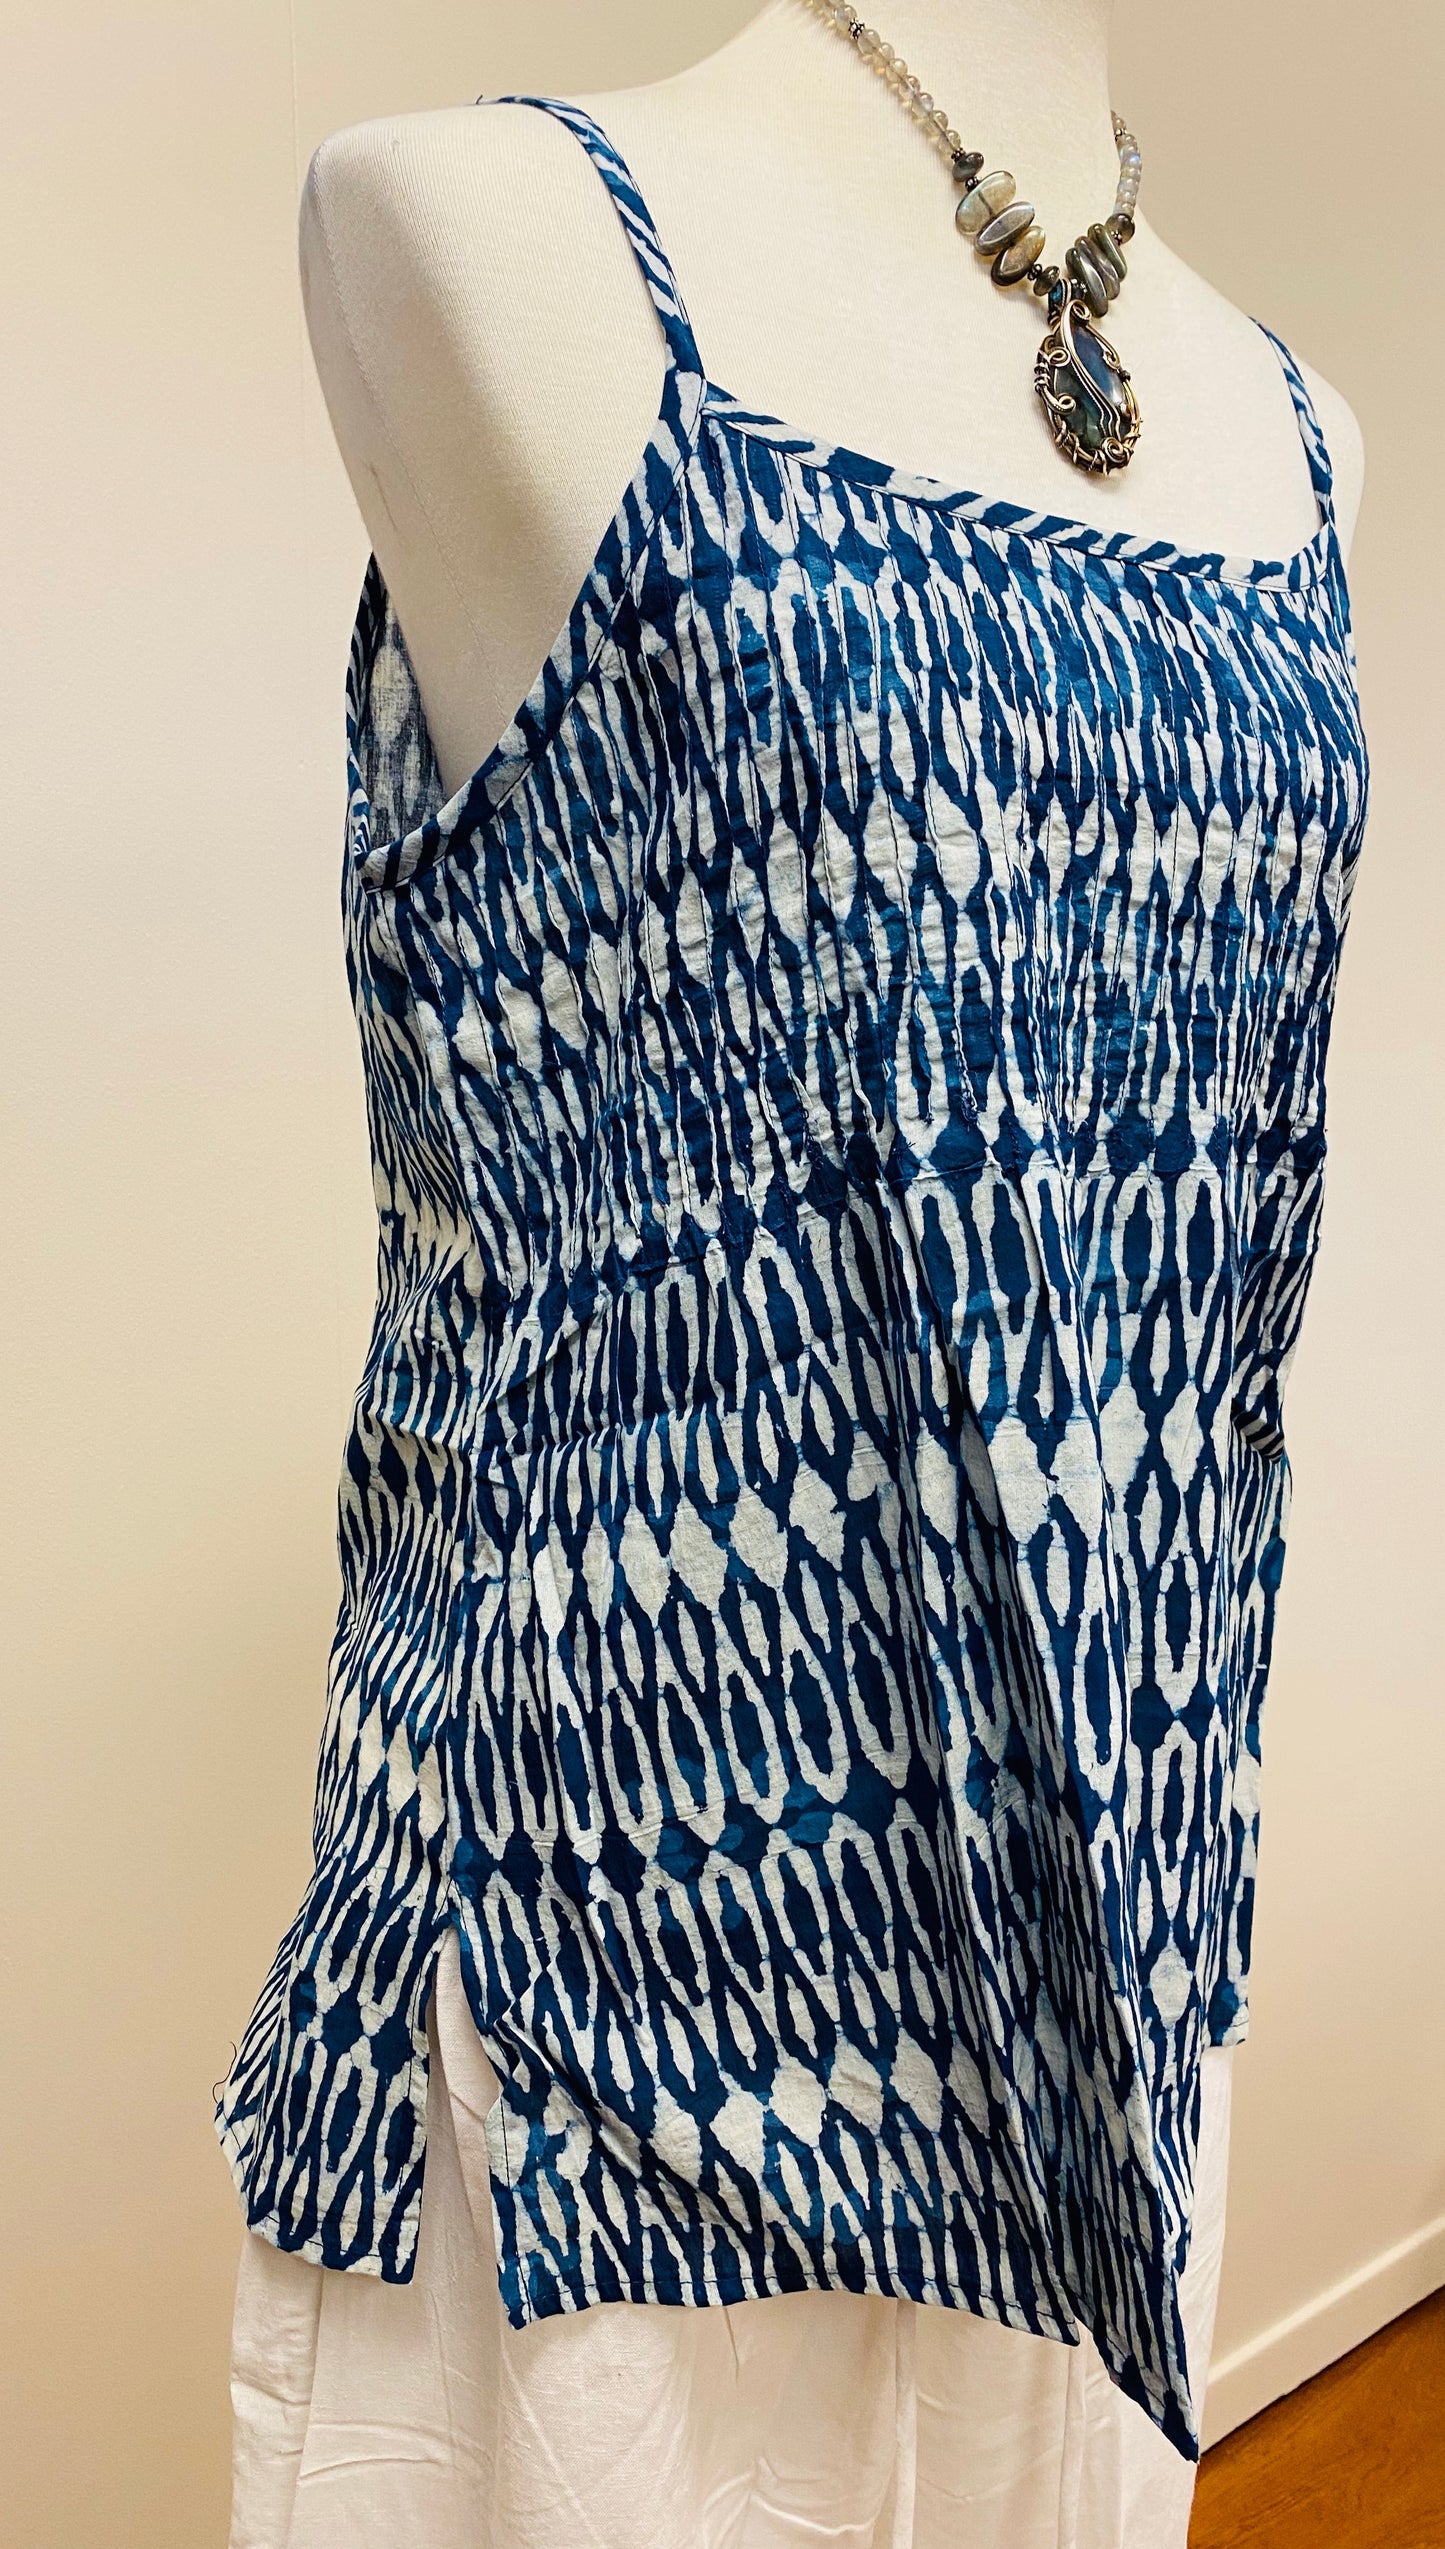 Hand Block Print Indigo Cotton Tank Top with pleated detail on top - 4 Patterns Available